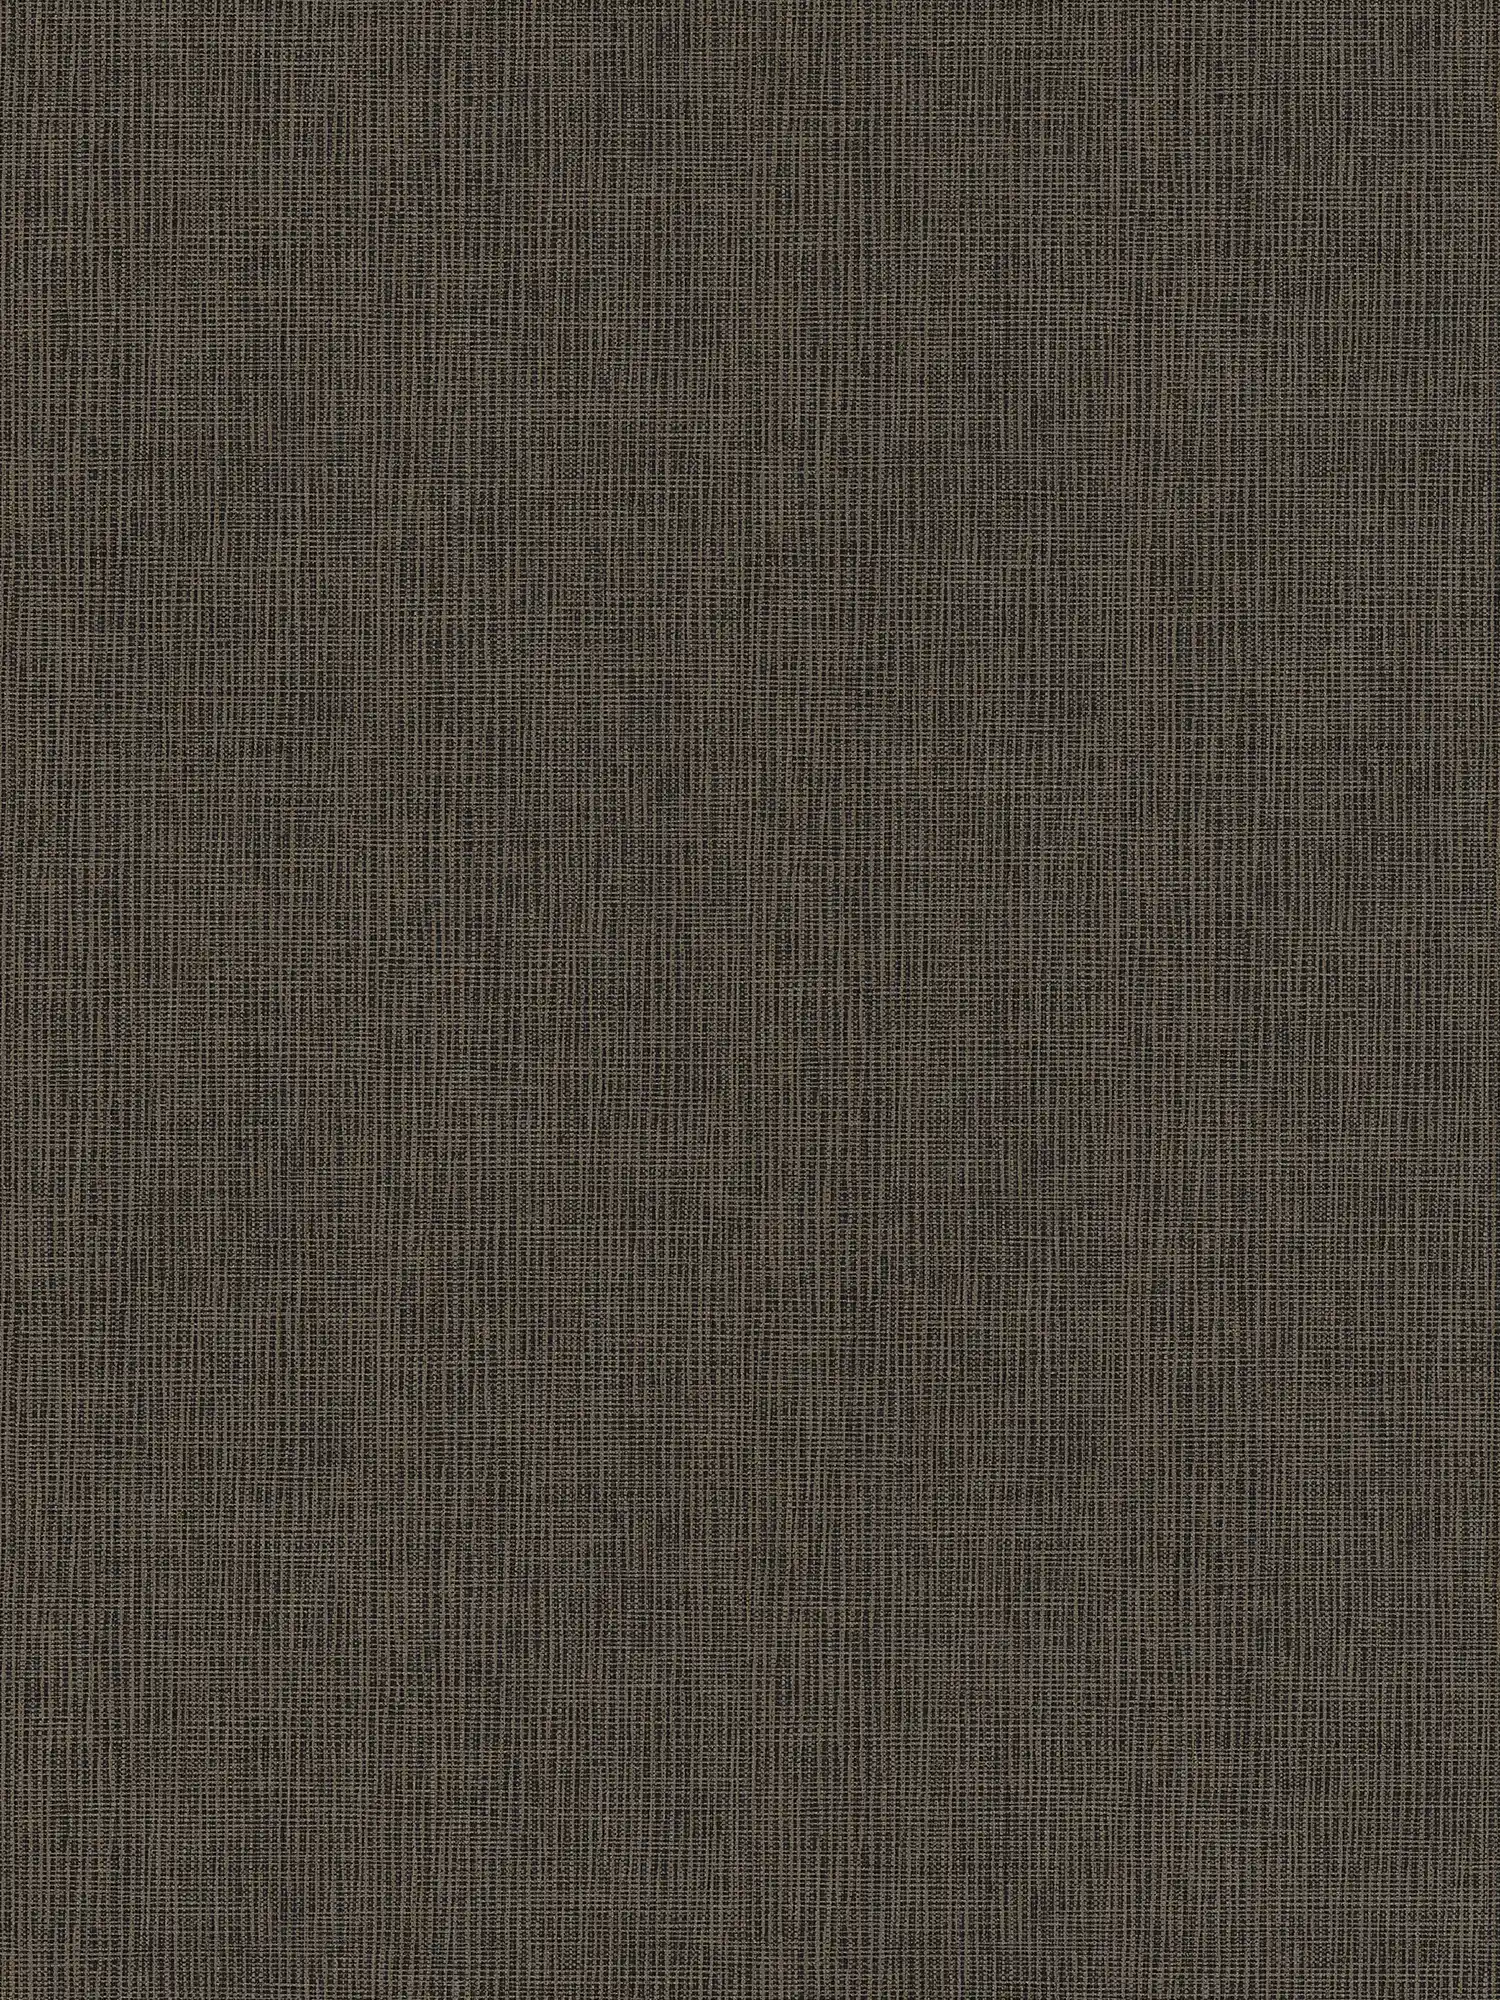 Brown non-woven wallpaper with grey & gold details - blue, grey, silver
